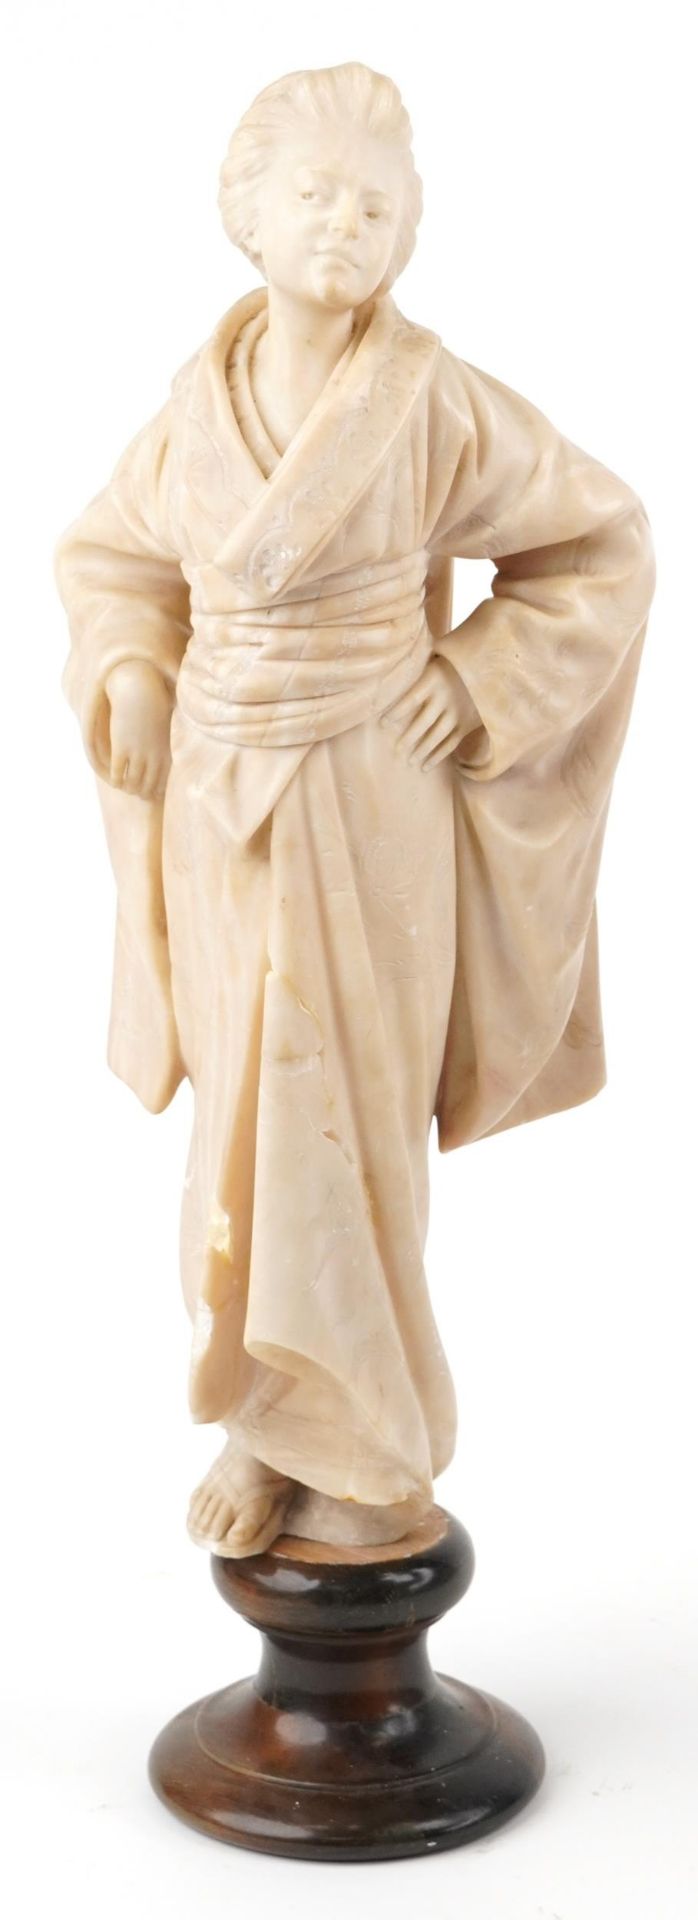 Large Art Nouveau marble carving of a Asian female wearing a robe raised on a later unassociated